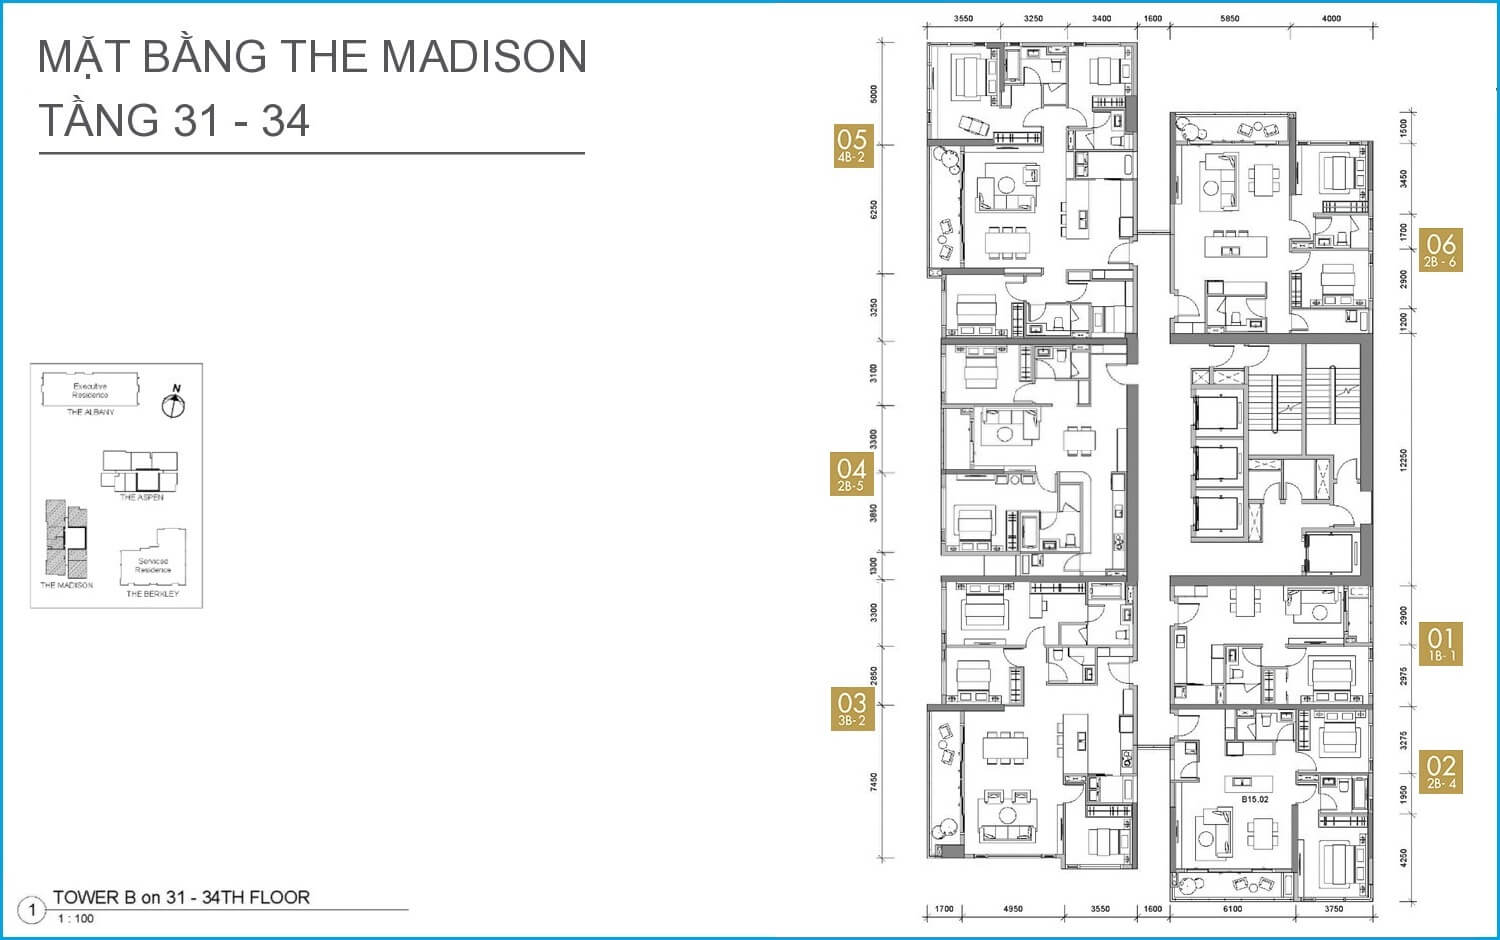 The Madison Gateway Thao Dien apartment in District 2